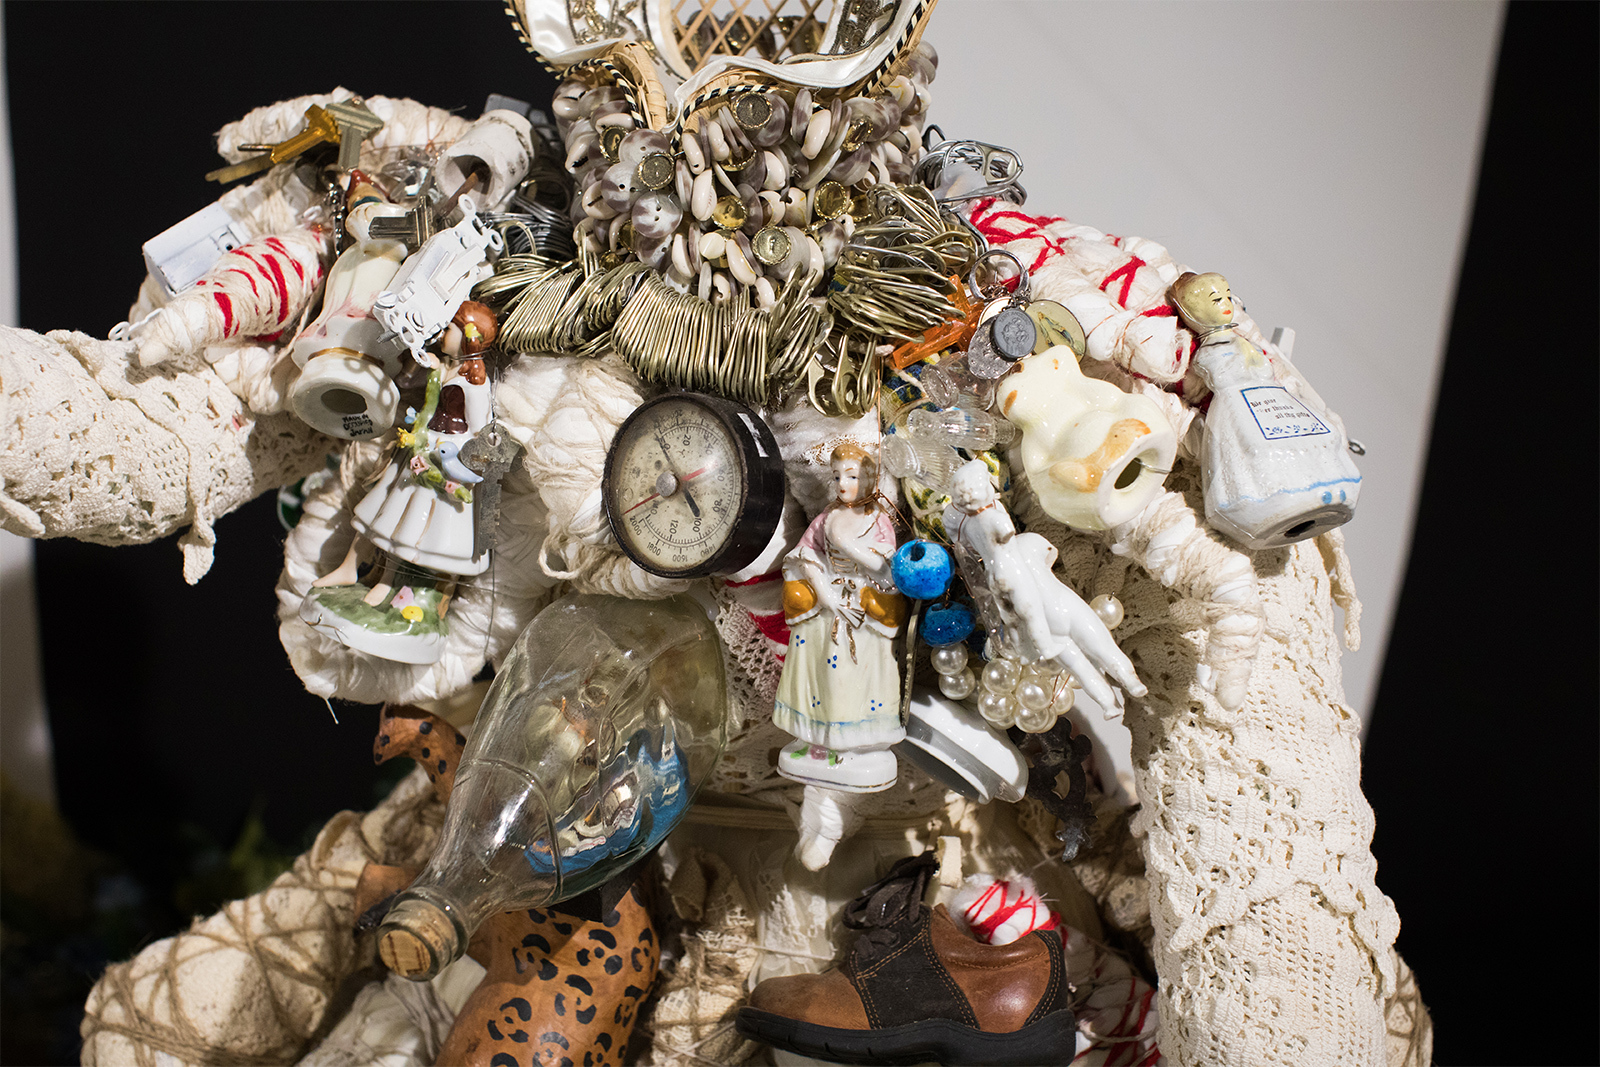 Vanessa German - detail of figure in white, adorned with several found object antique pieces. Many are Victorian era porcelain figures of caucasian "upper class" women. There is also a necklace of soda can tops, an old clock, and a baby's shoe.